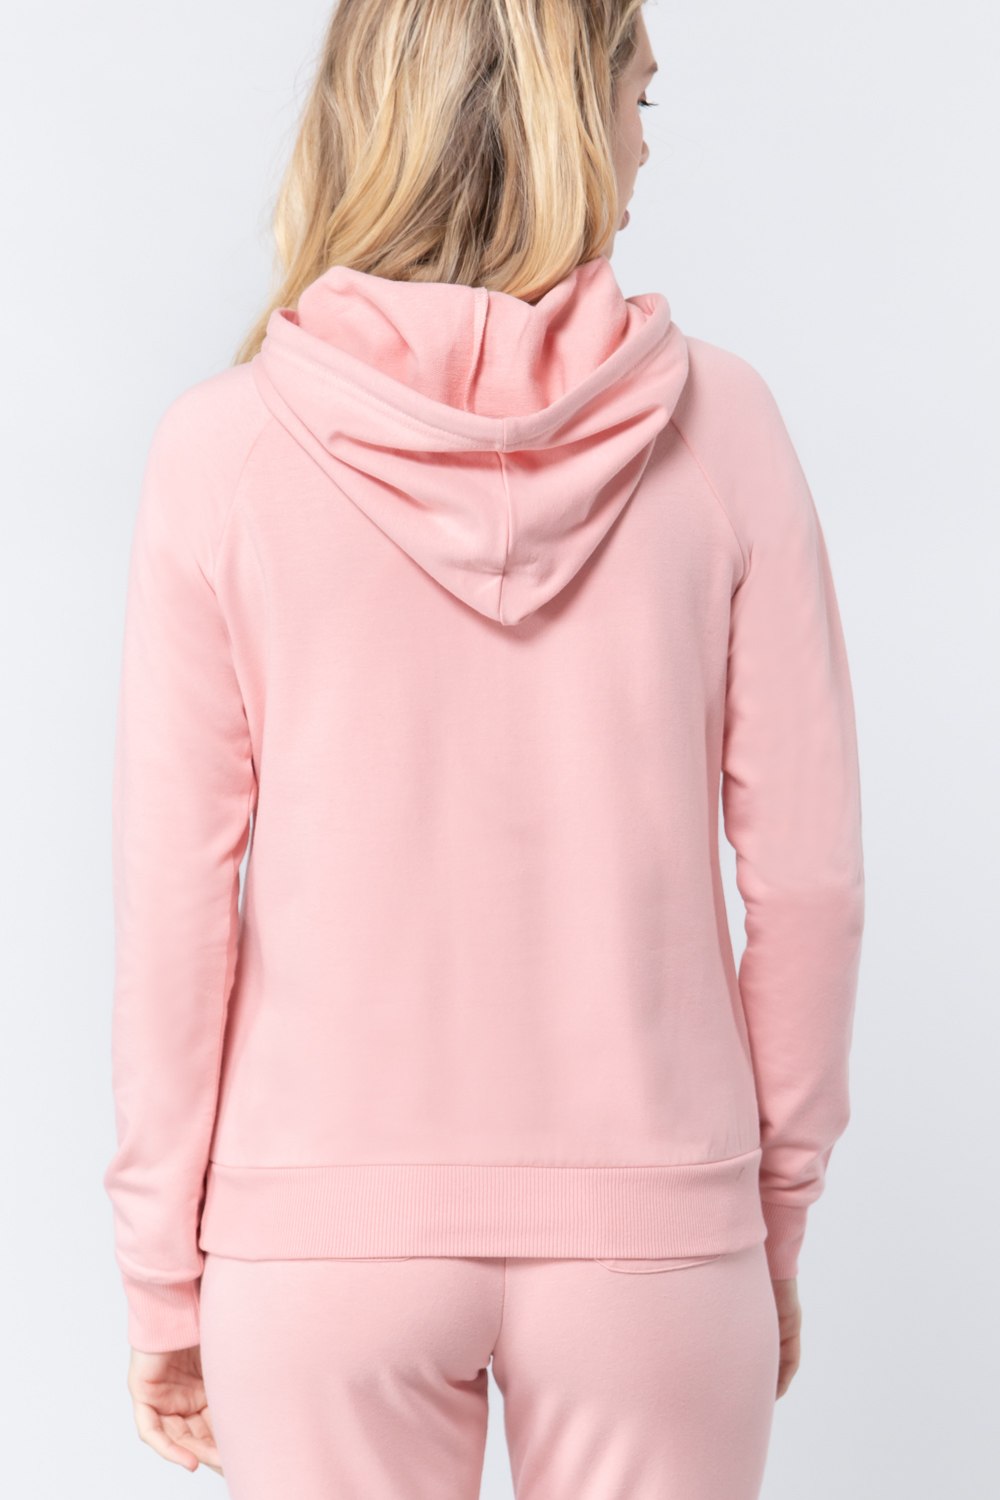 French Terry Pullover Hoodie - bertofonsi